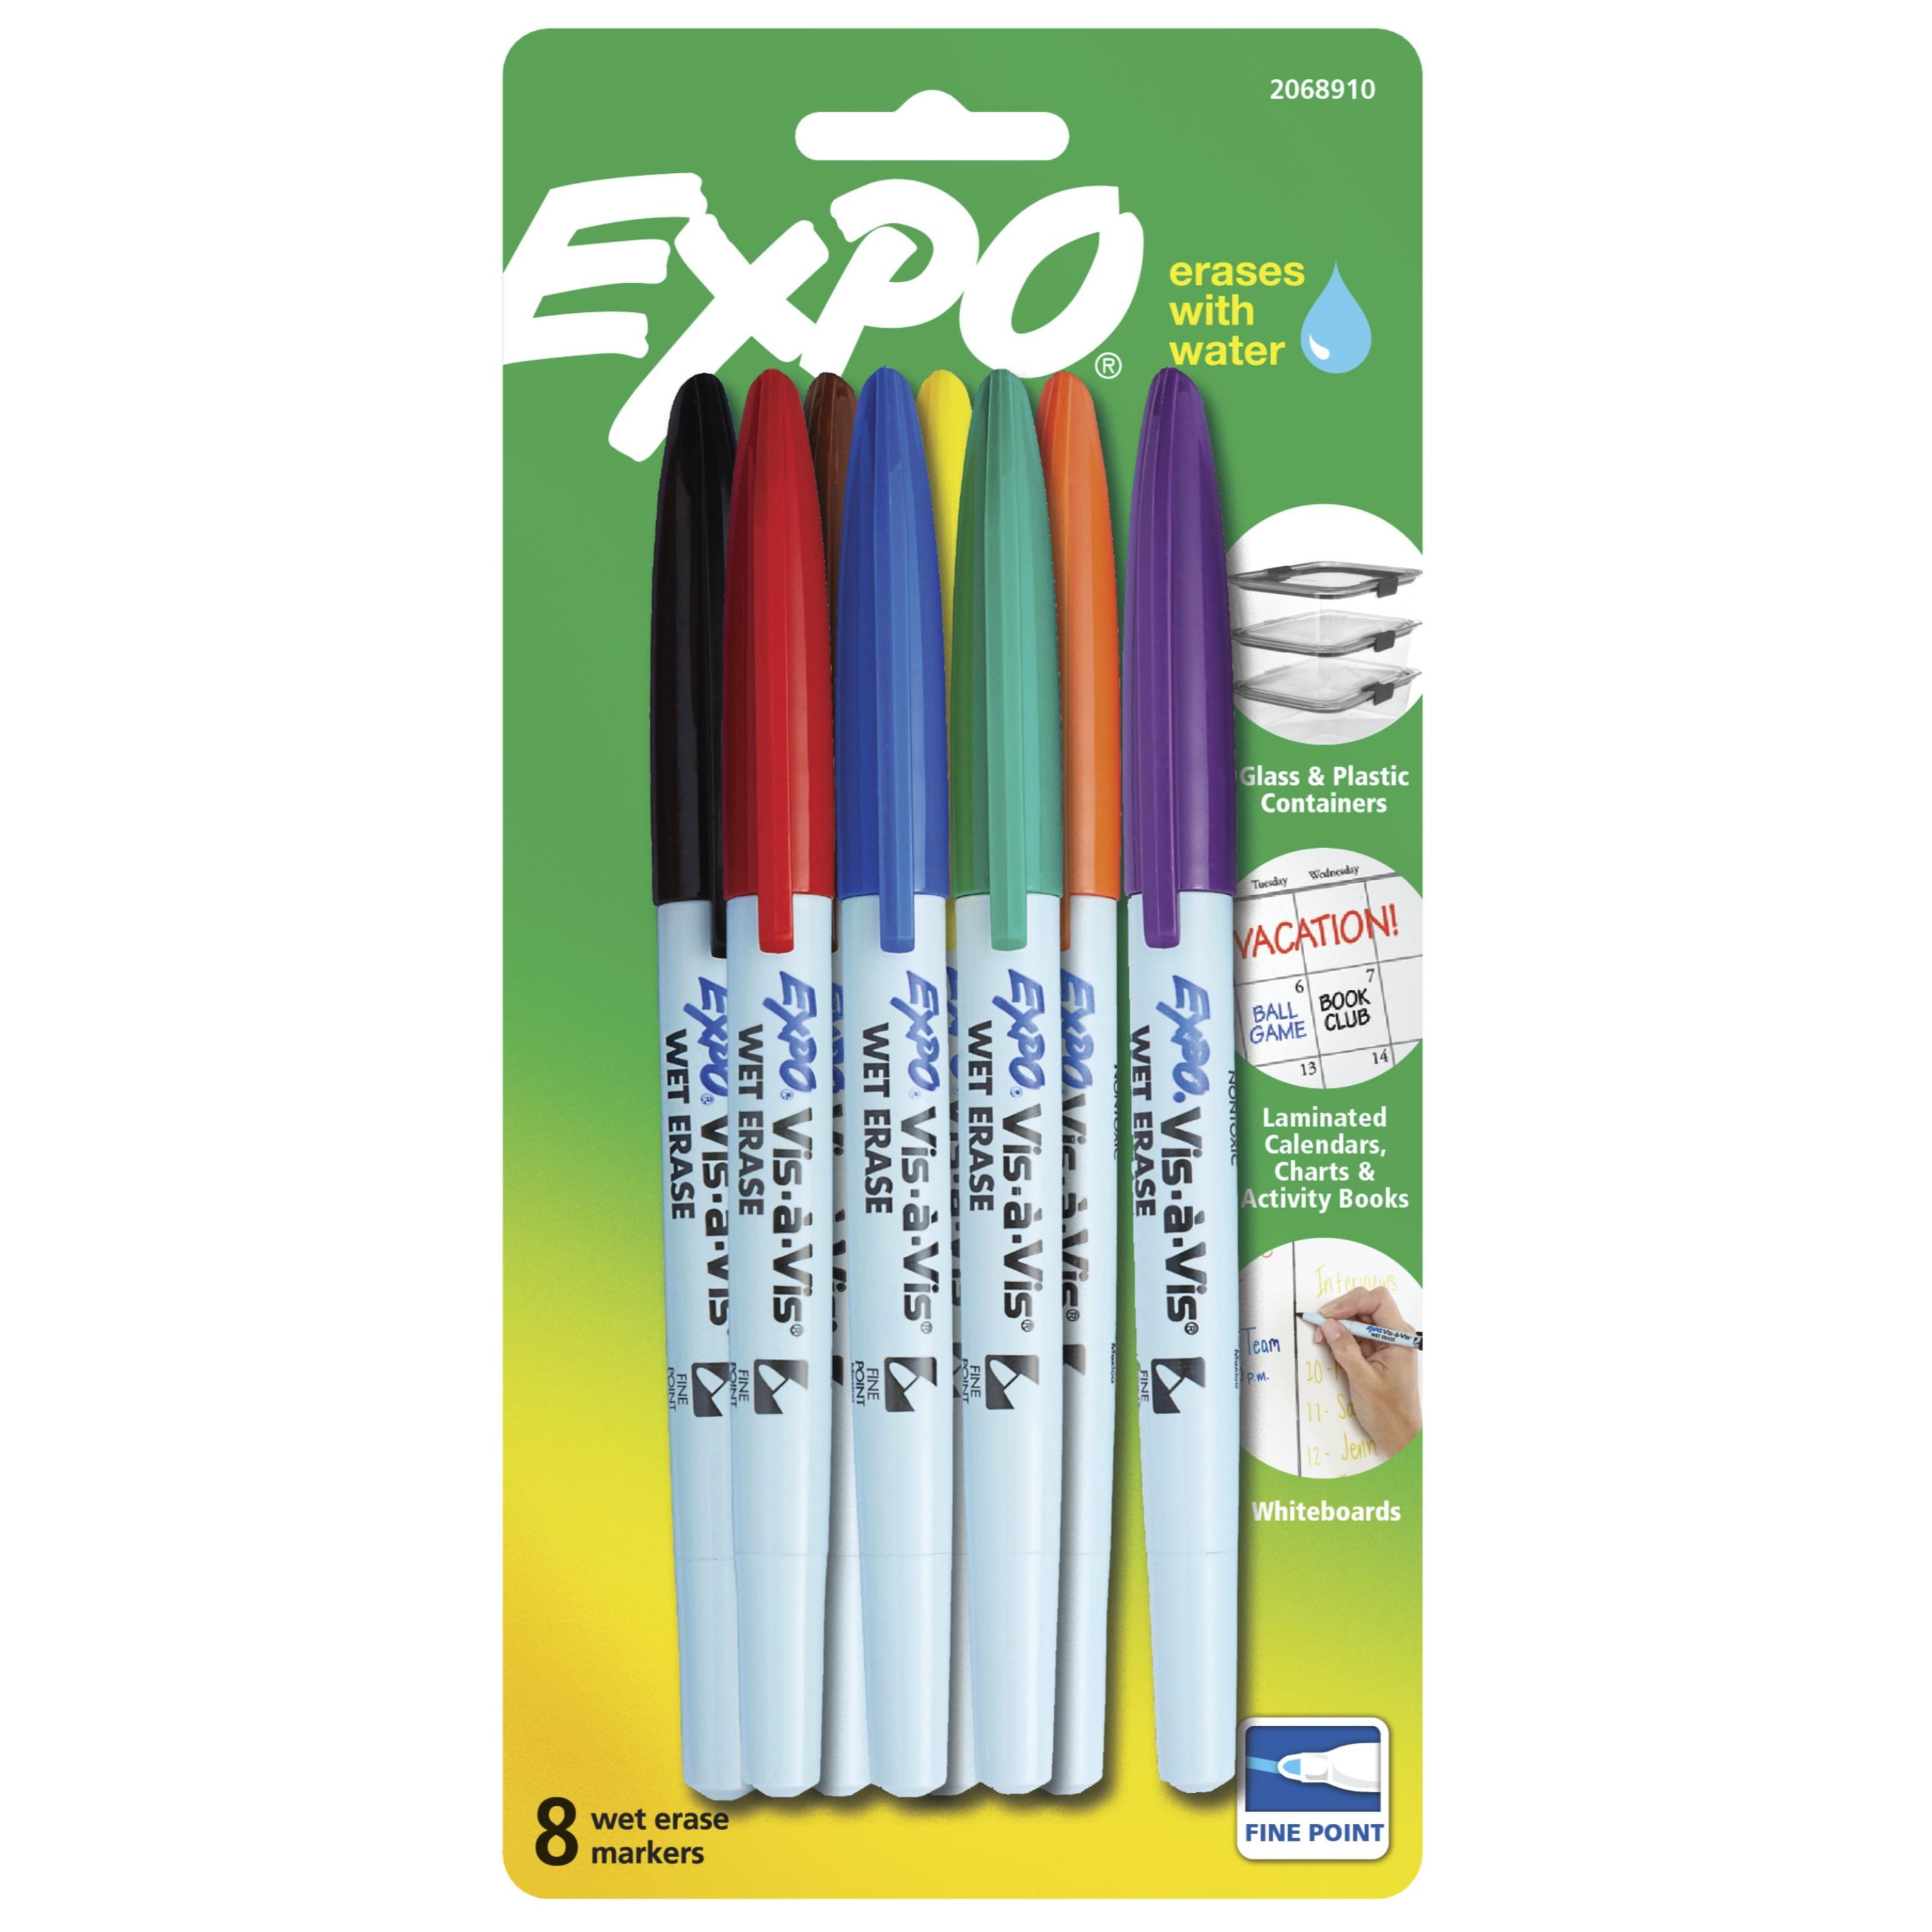 Promotional Fine Point Wet Erase Markers - USA Made $0.50